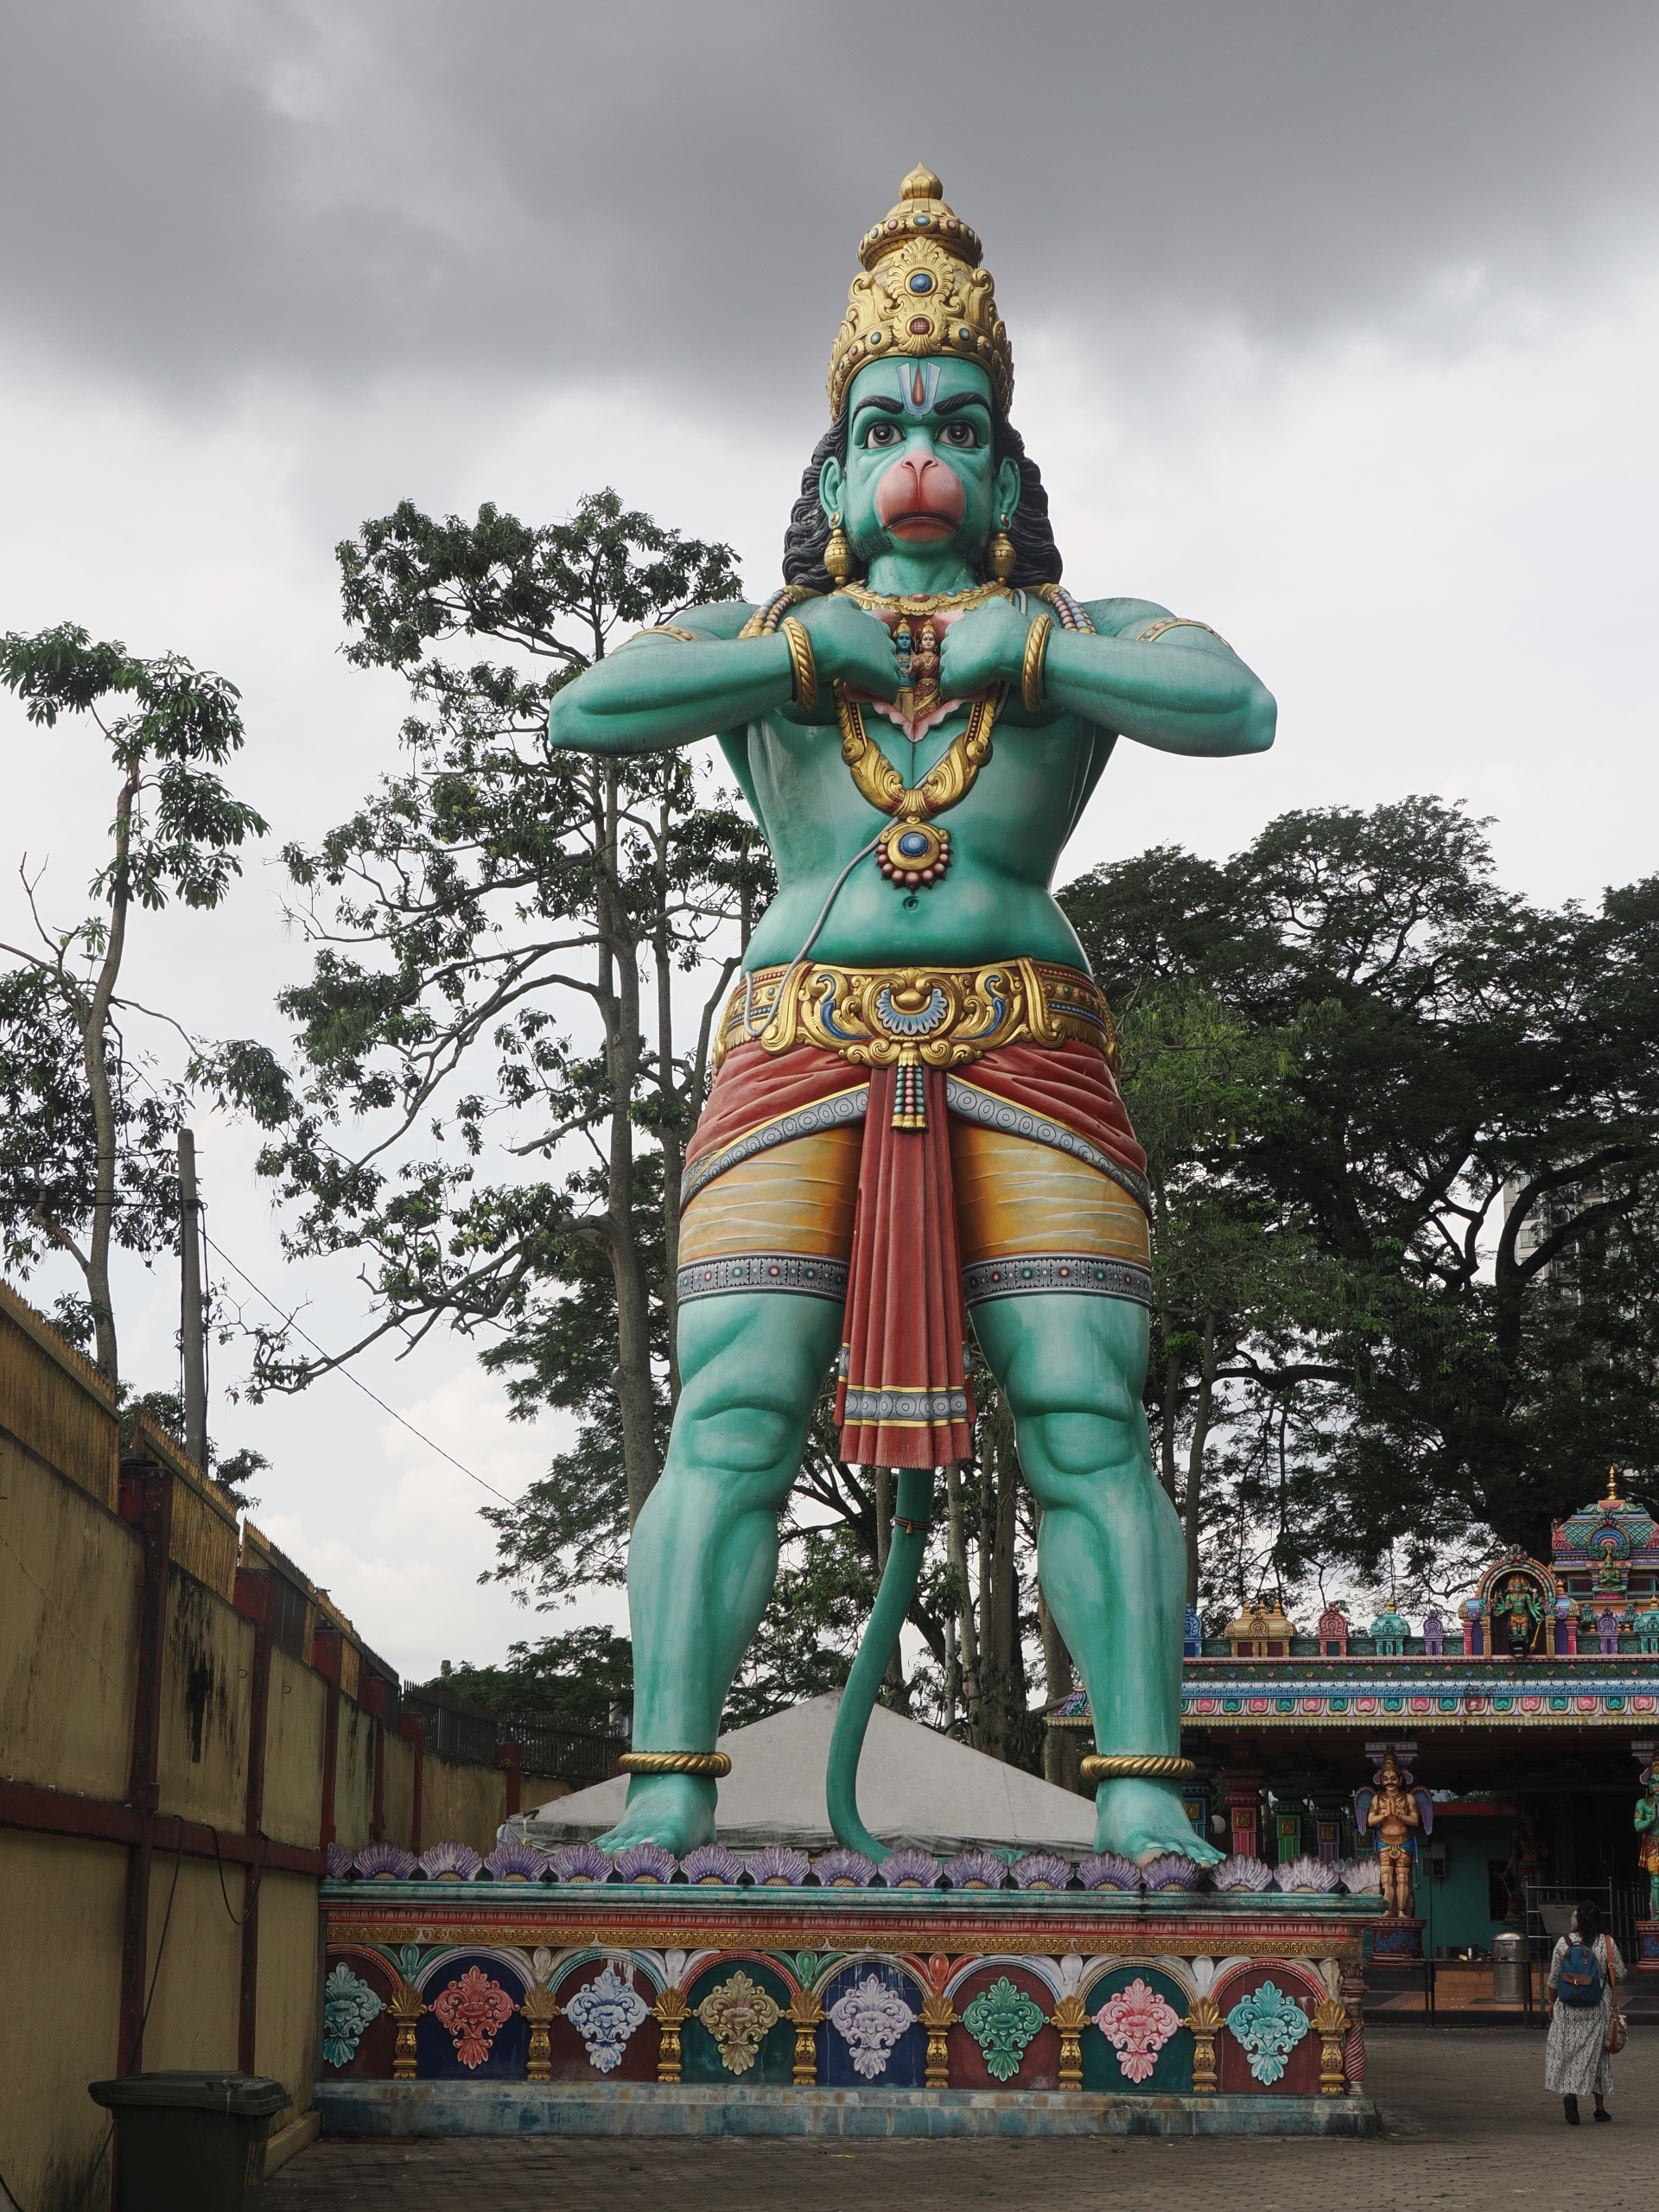 The nearby Ramayana Cave, with its statue of Lord Hanuman <em>isn't</em> the Batu Caves.